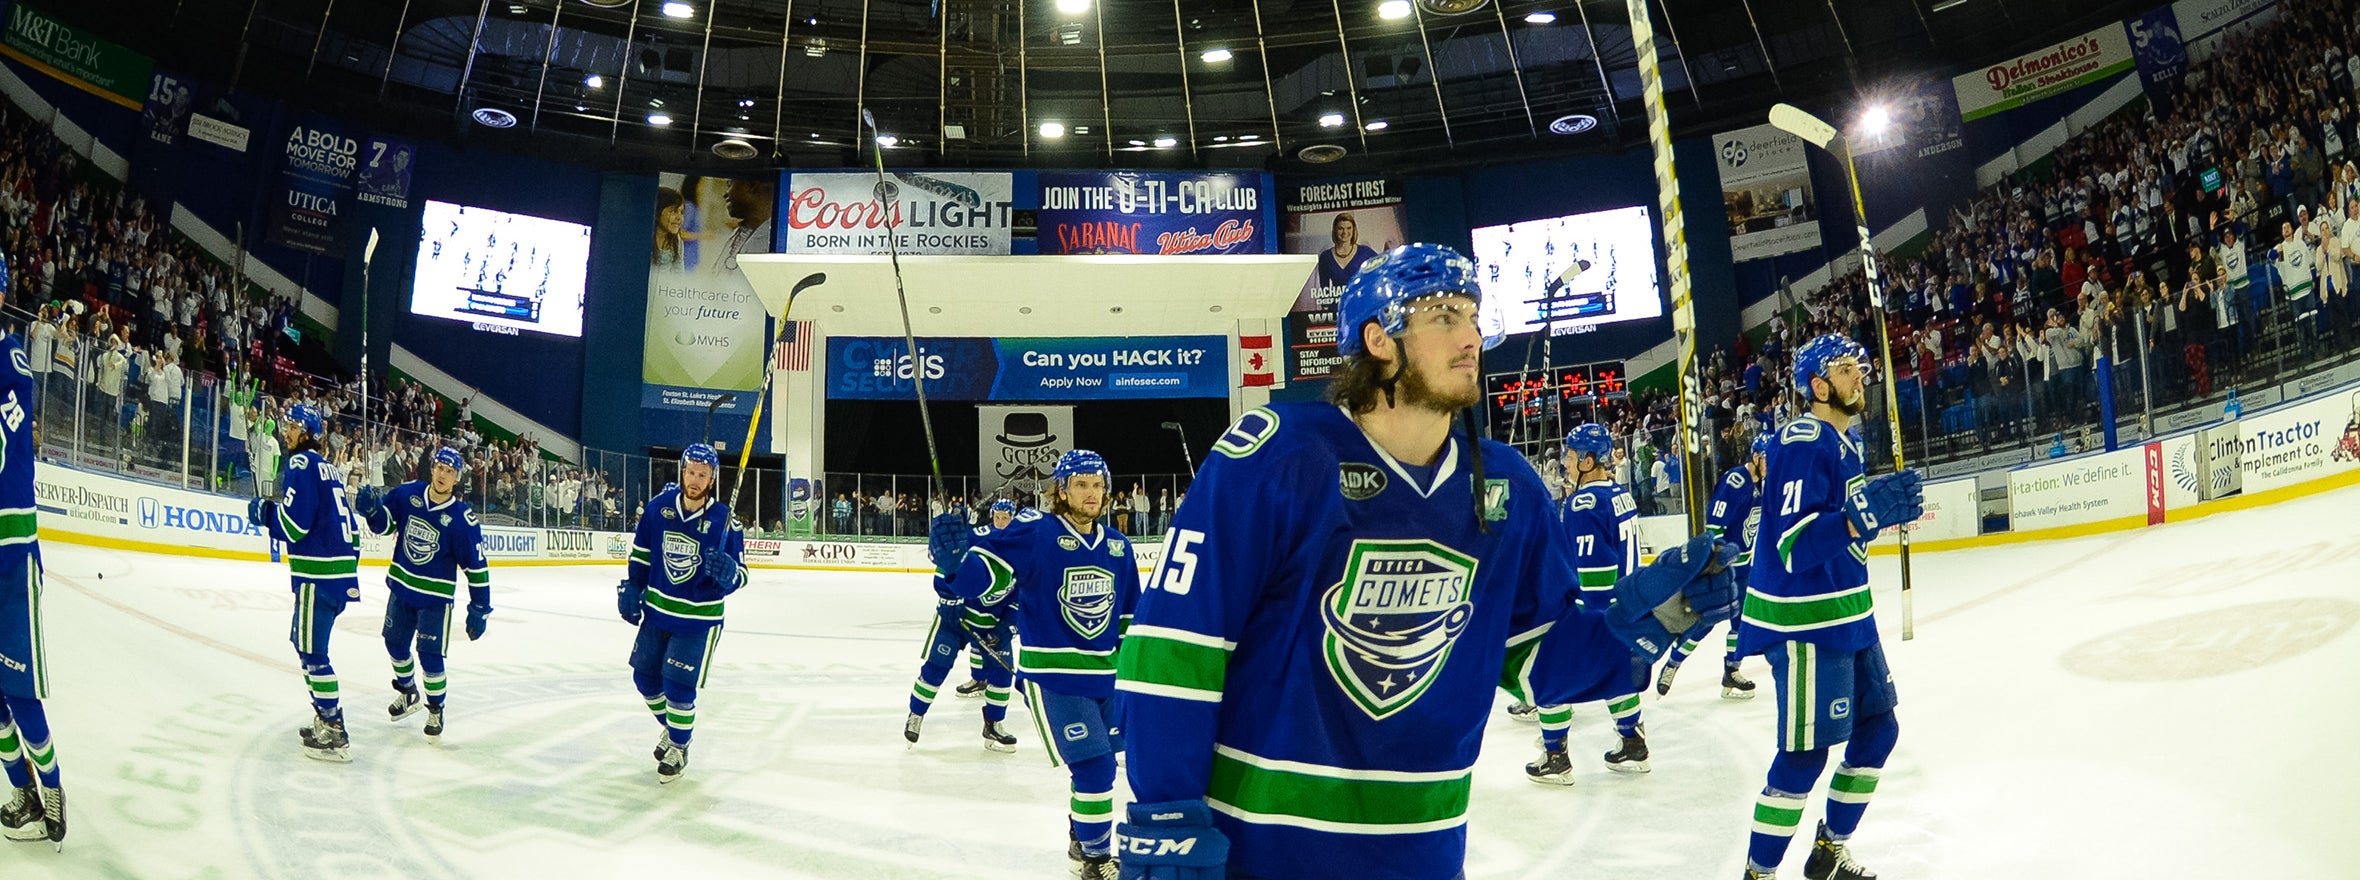 ELECTRIC CROWD PROPELS COMETS TO VICTORY